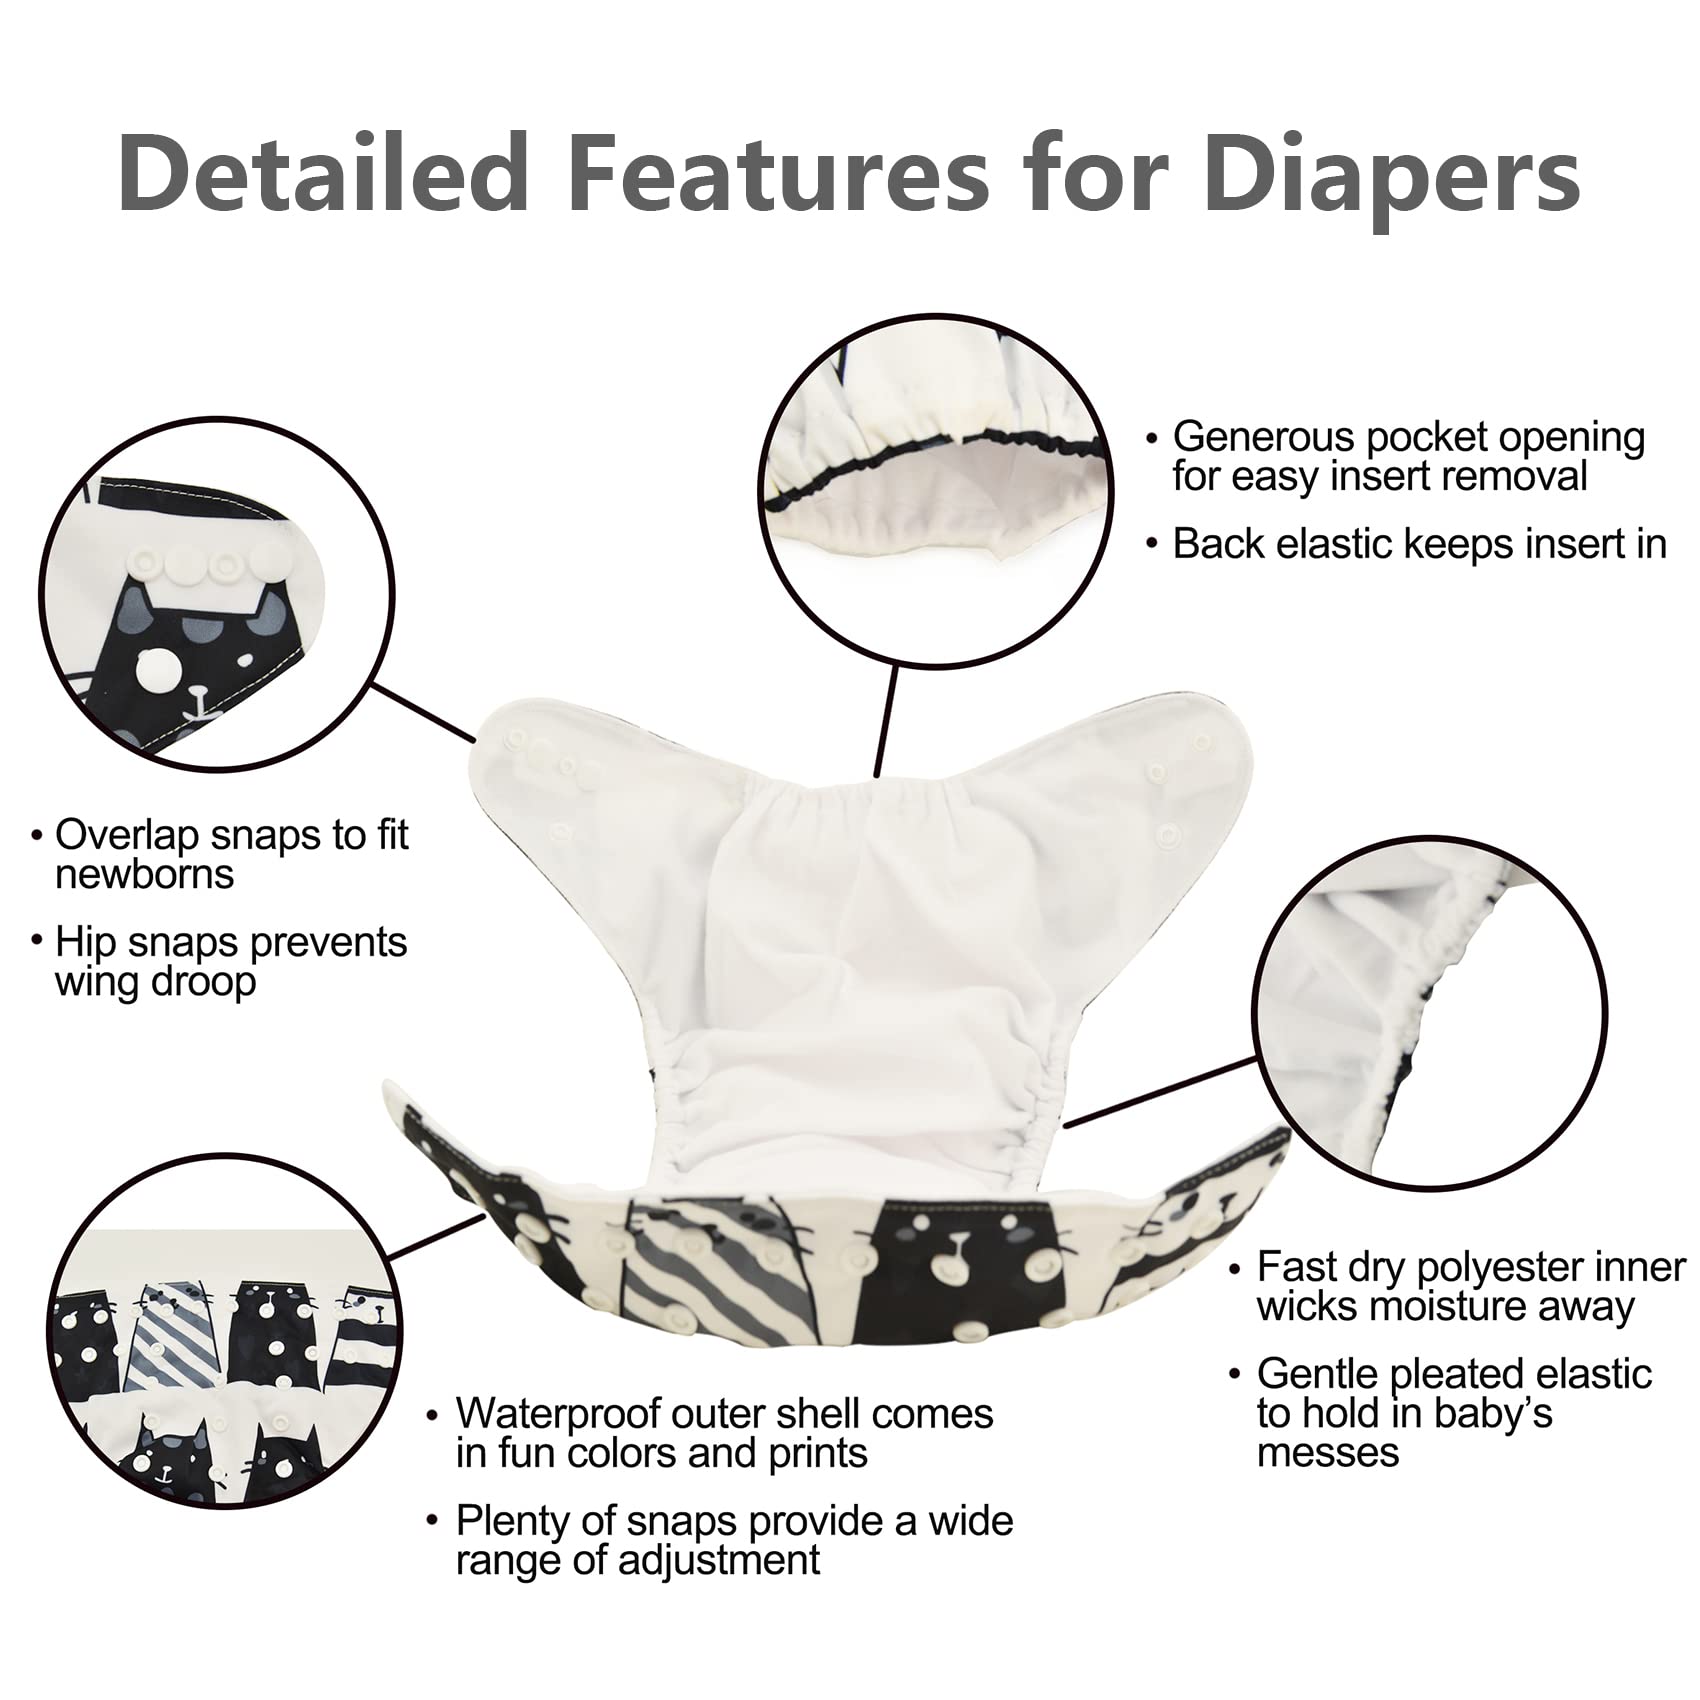 babygoal Reusable Cloth Diapers for Baby Girls, One Size Adjustable Washable Pocket Nappy Covers 6 Pack+ 6pcs Microfiber Inserts+4pcs Bamboo Inserts 6FG30